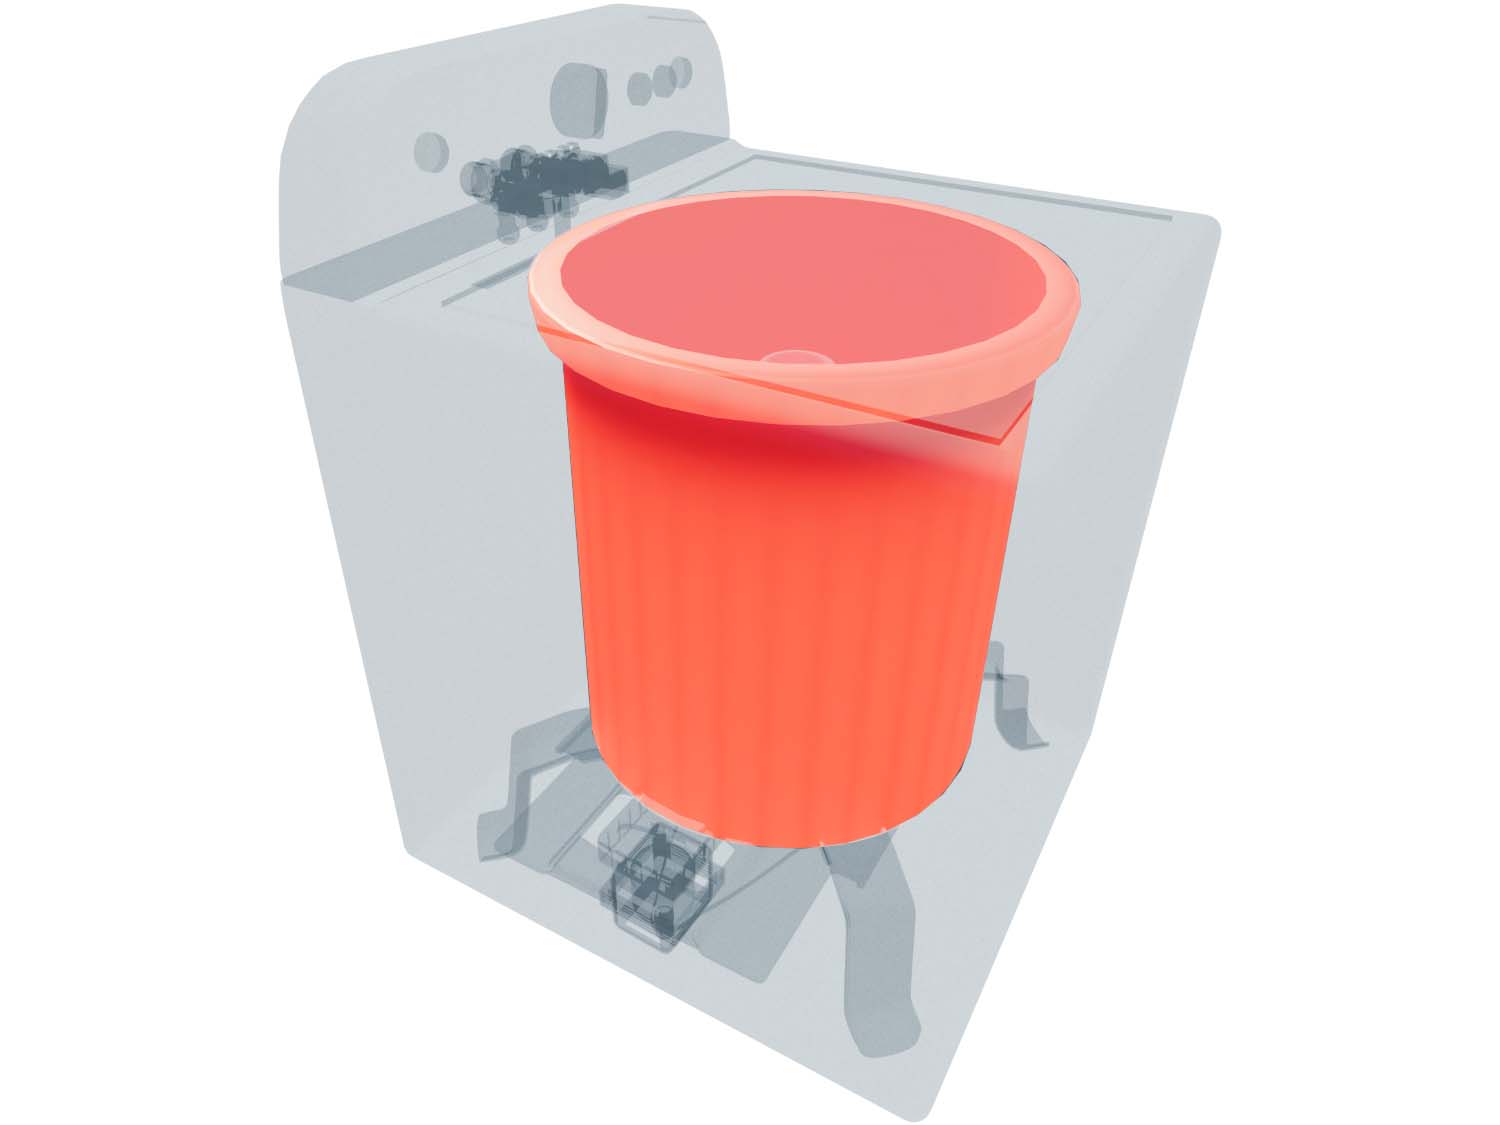 A 3D diagram showing the components of a top load washer and specifying the location of the tub